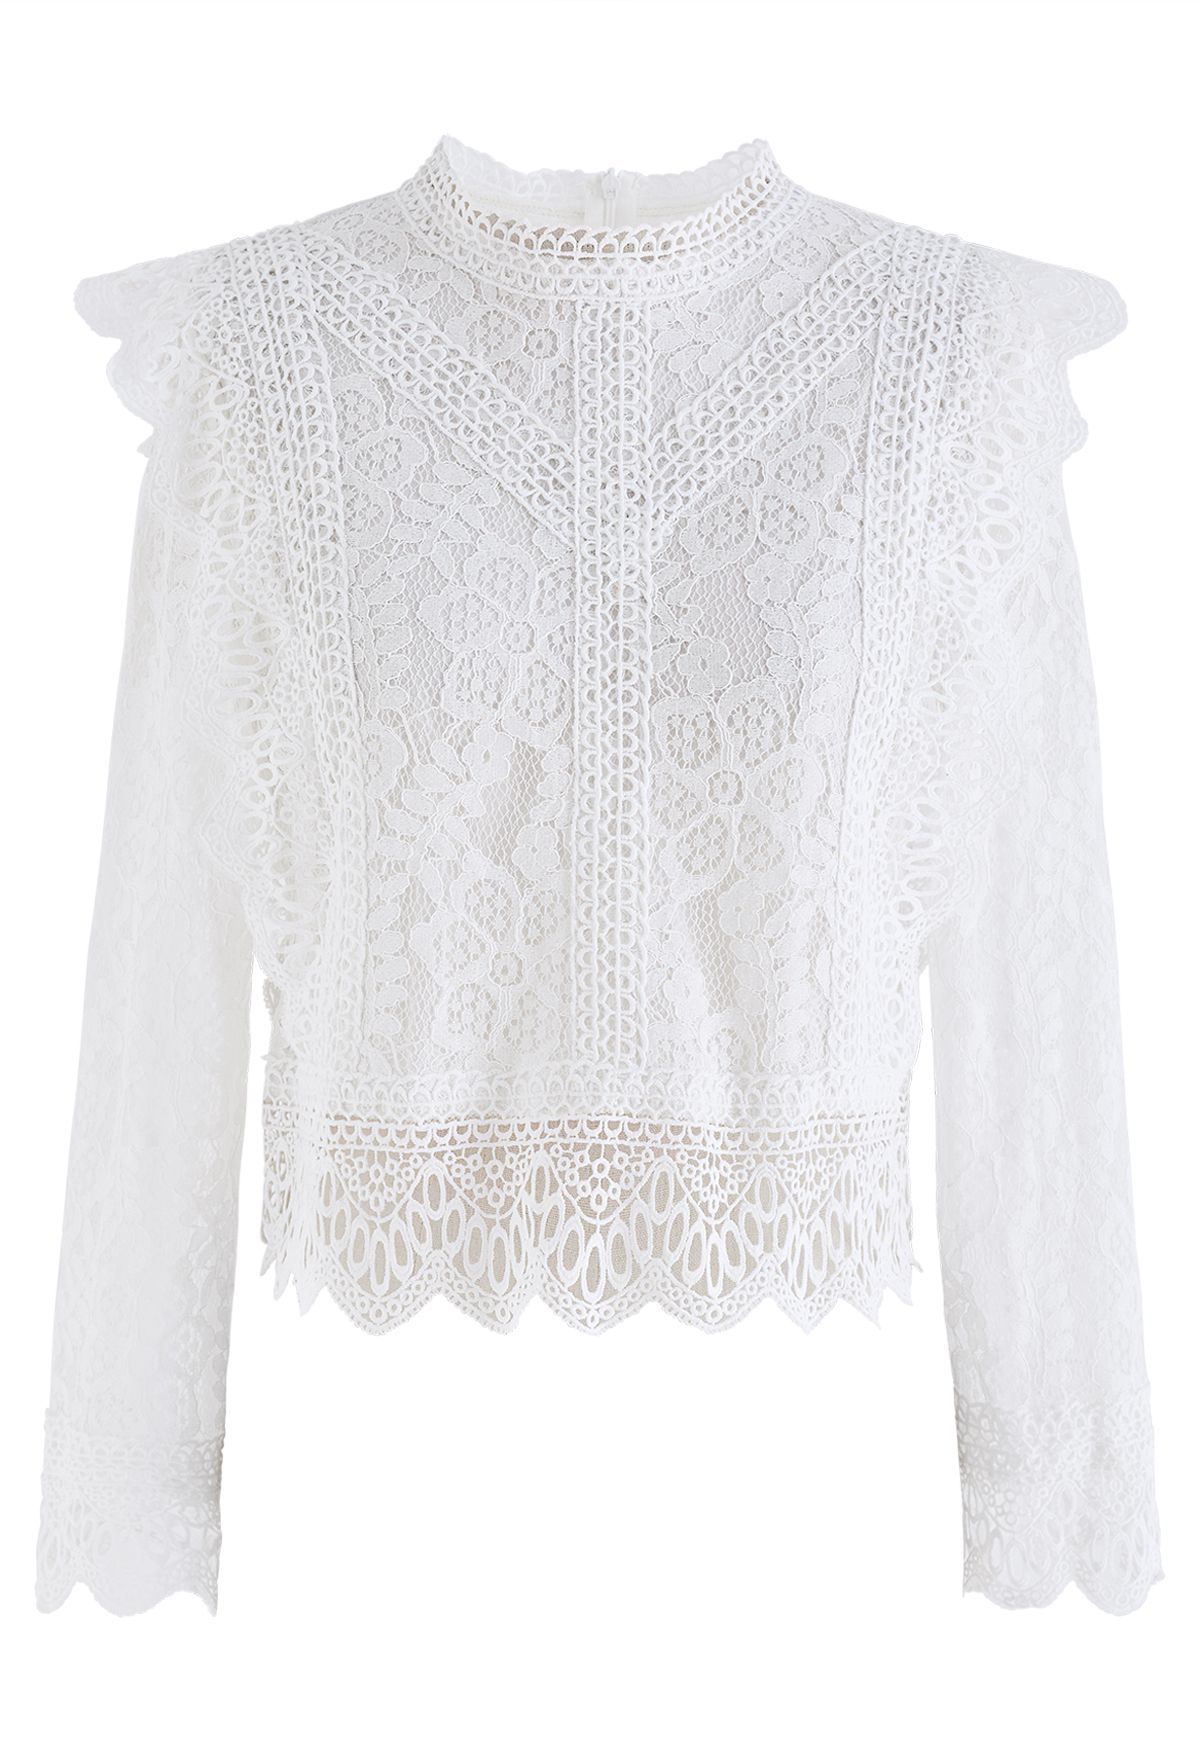 Your Sassy Start Long Sleeve Crochet Lace Top in White - Retro, Indie ...